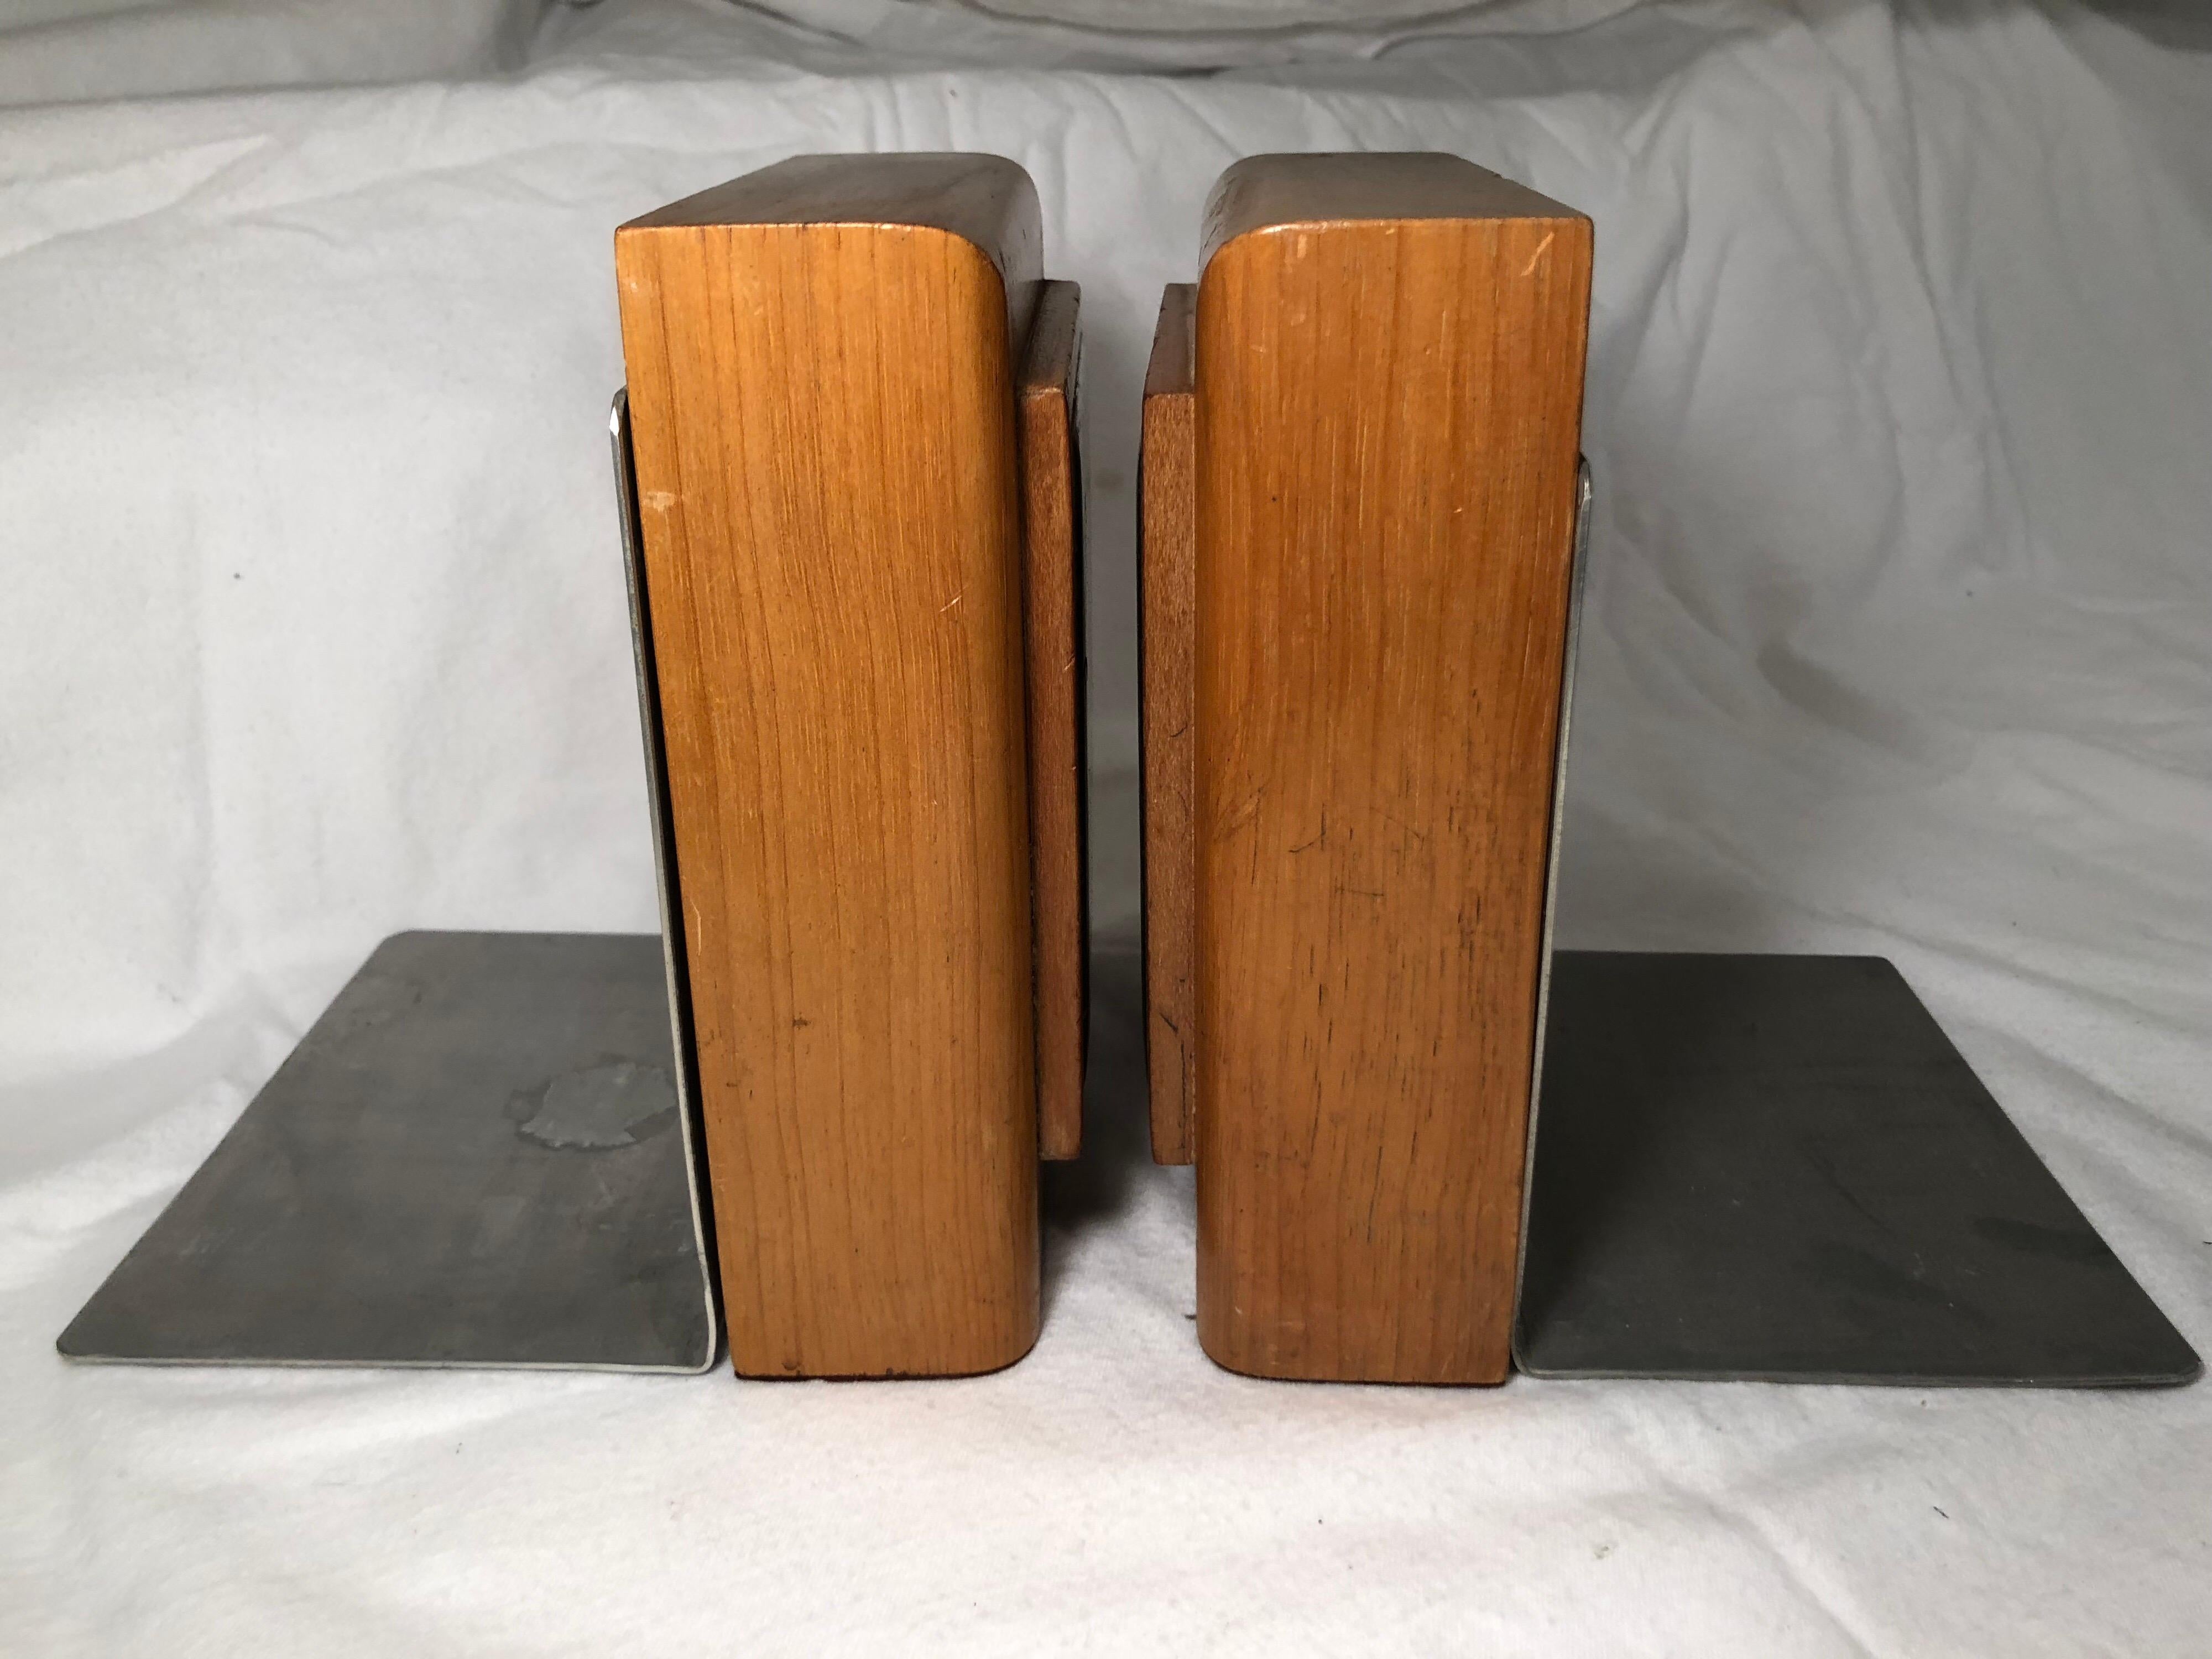 Pair of Mid-Century Modern Enamel and Blonde Wood Bookends Signed Prins 5